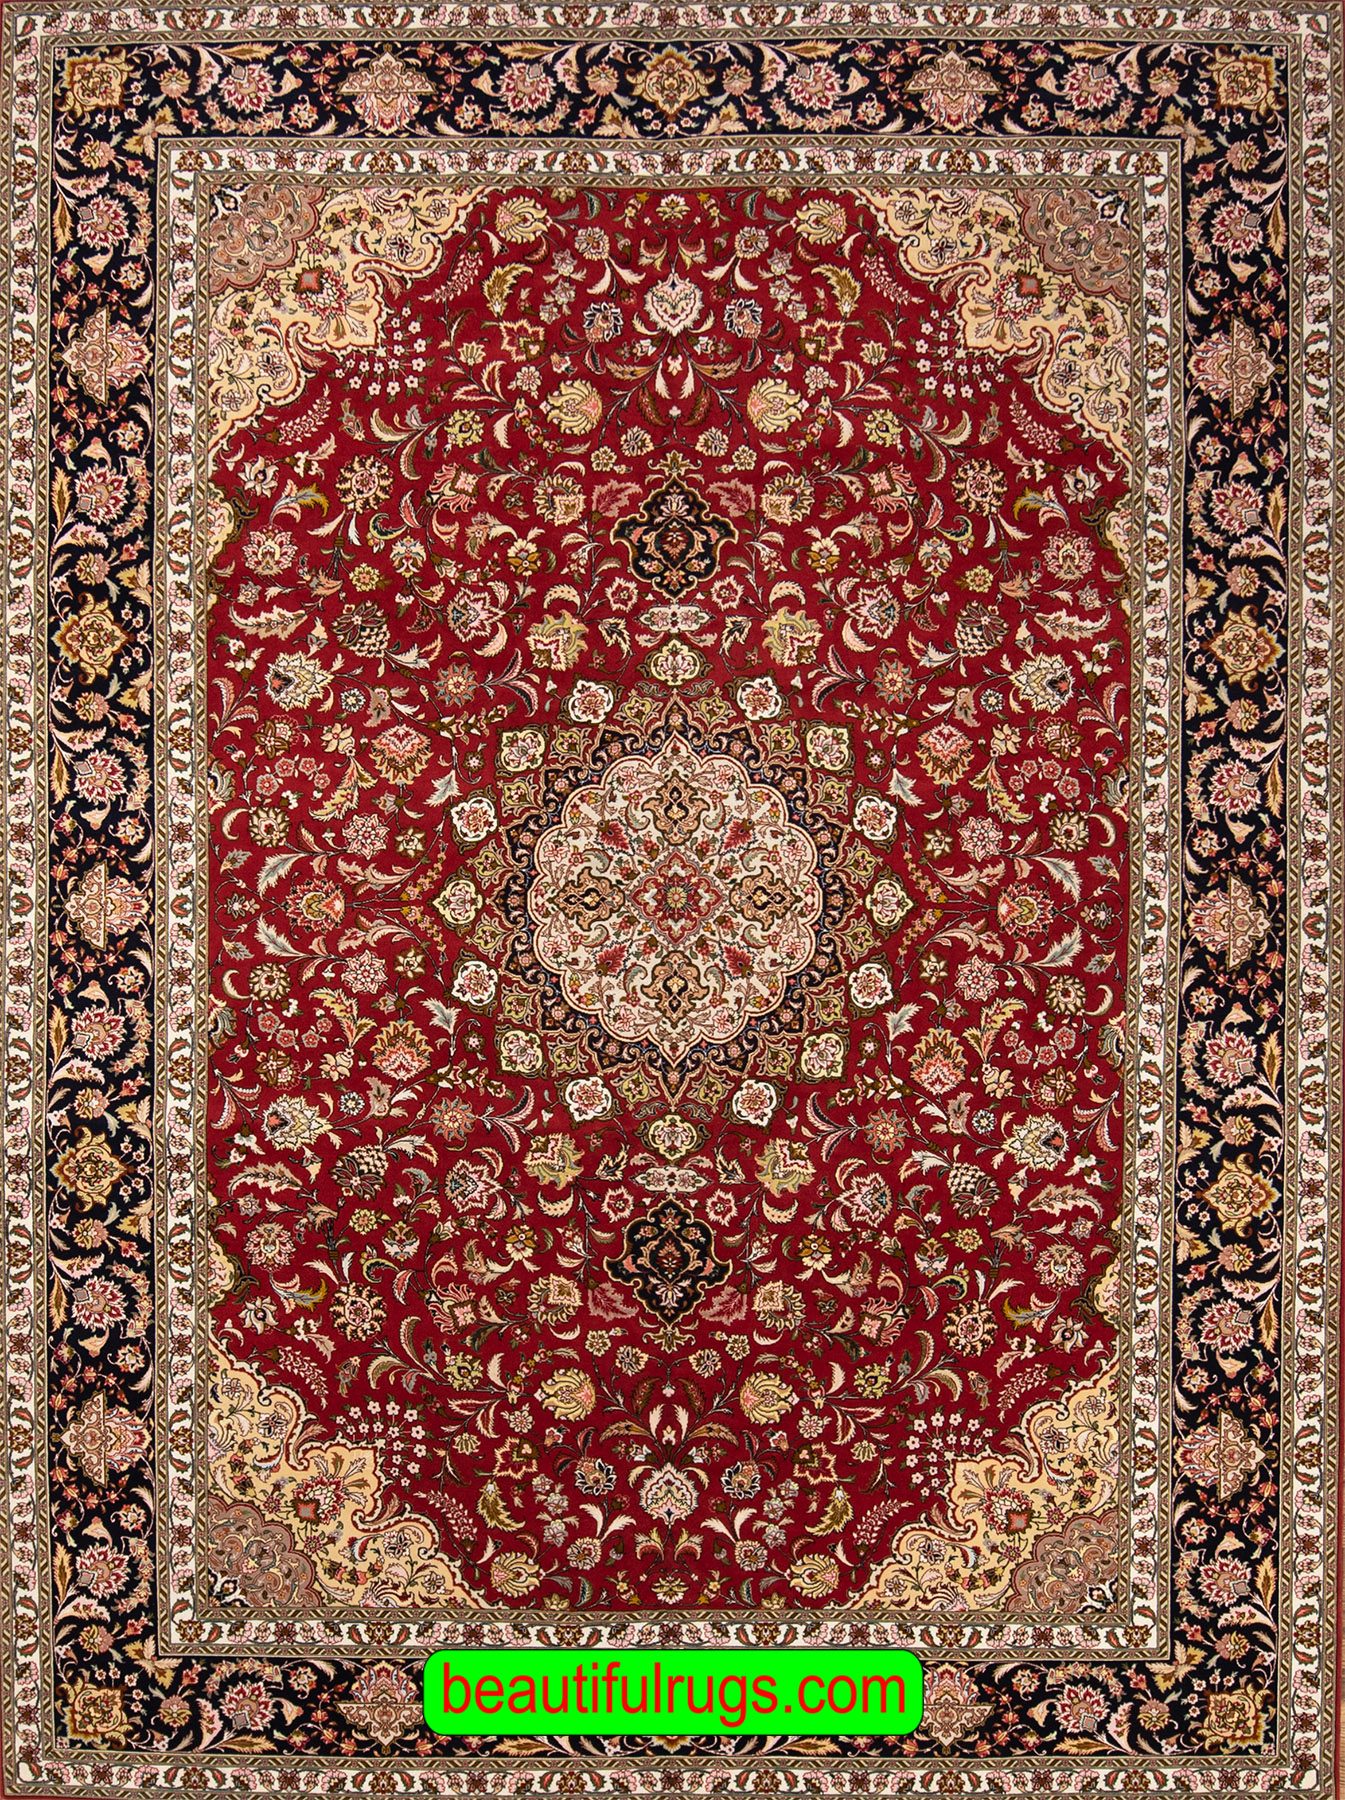 Persian Tabriz wool and silk rug in orange red and black colors. Size 8.3x11.8